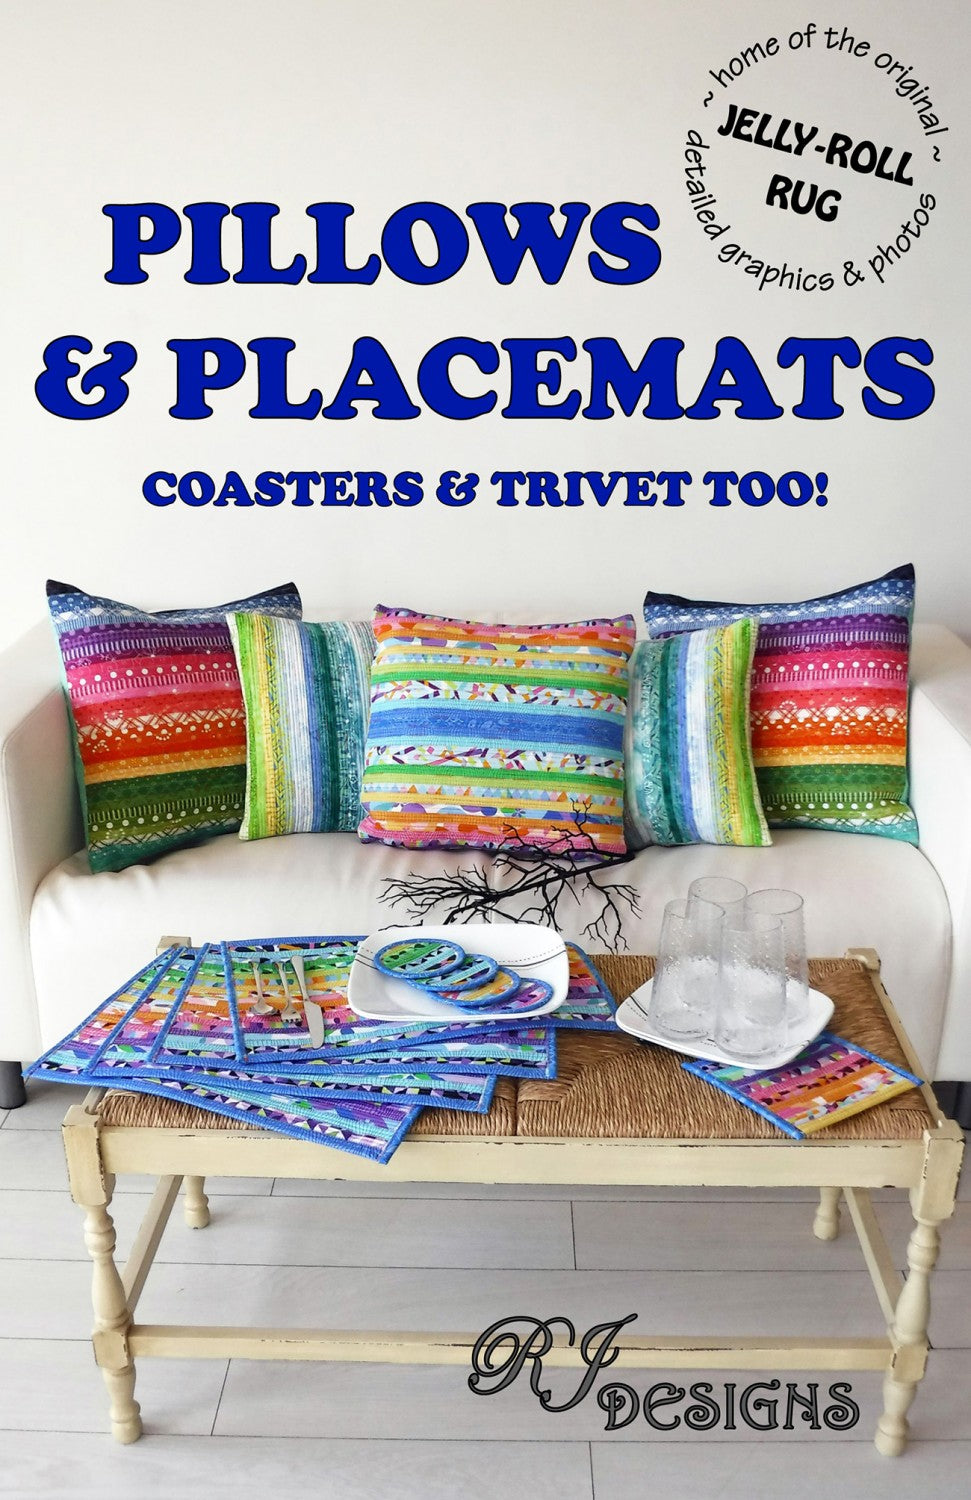 Pillows & Placemats, Coasters & Trivets Quilt Pattern for Jelly Rolls